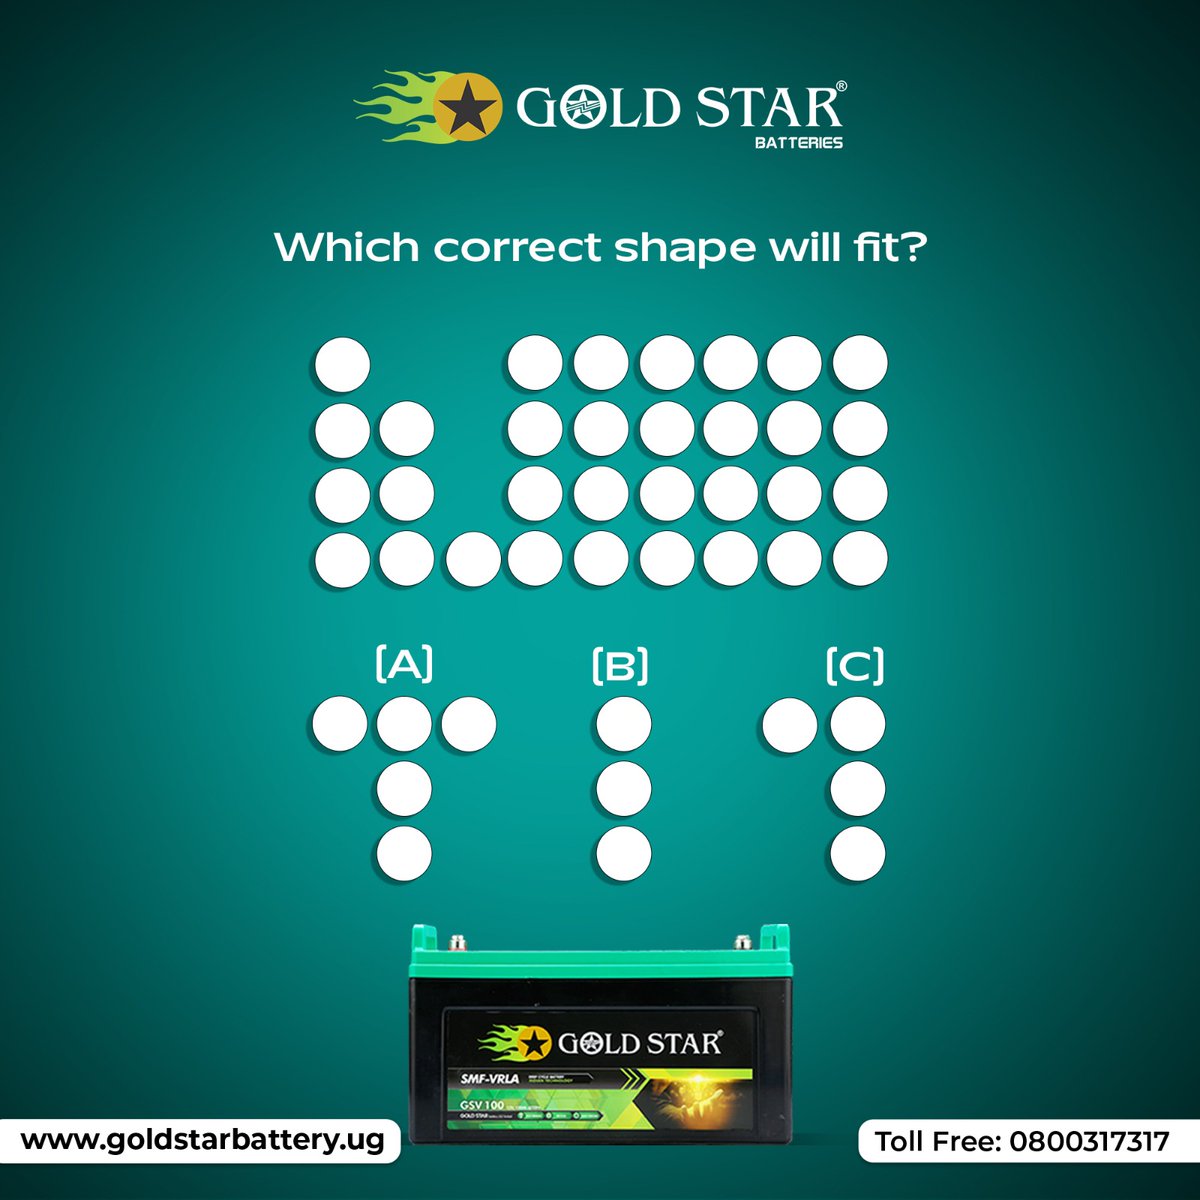 Can you guess the right answer? 
Let us know in the comment section below.

Follow us : @GoldStarBattery 

#GoldStarBattery #Battery #Solarbattery #GamePost #TrickyQuestion #BrainTeaser #BrainTwister #GuessTheAnswer #CommentBelow #InteractiveFun #BatteryBusiness #Uganda